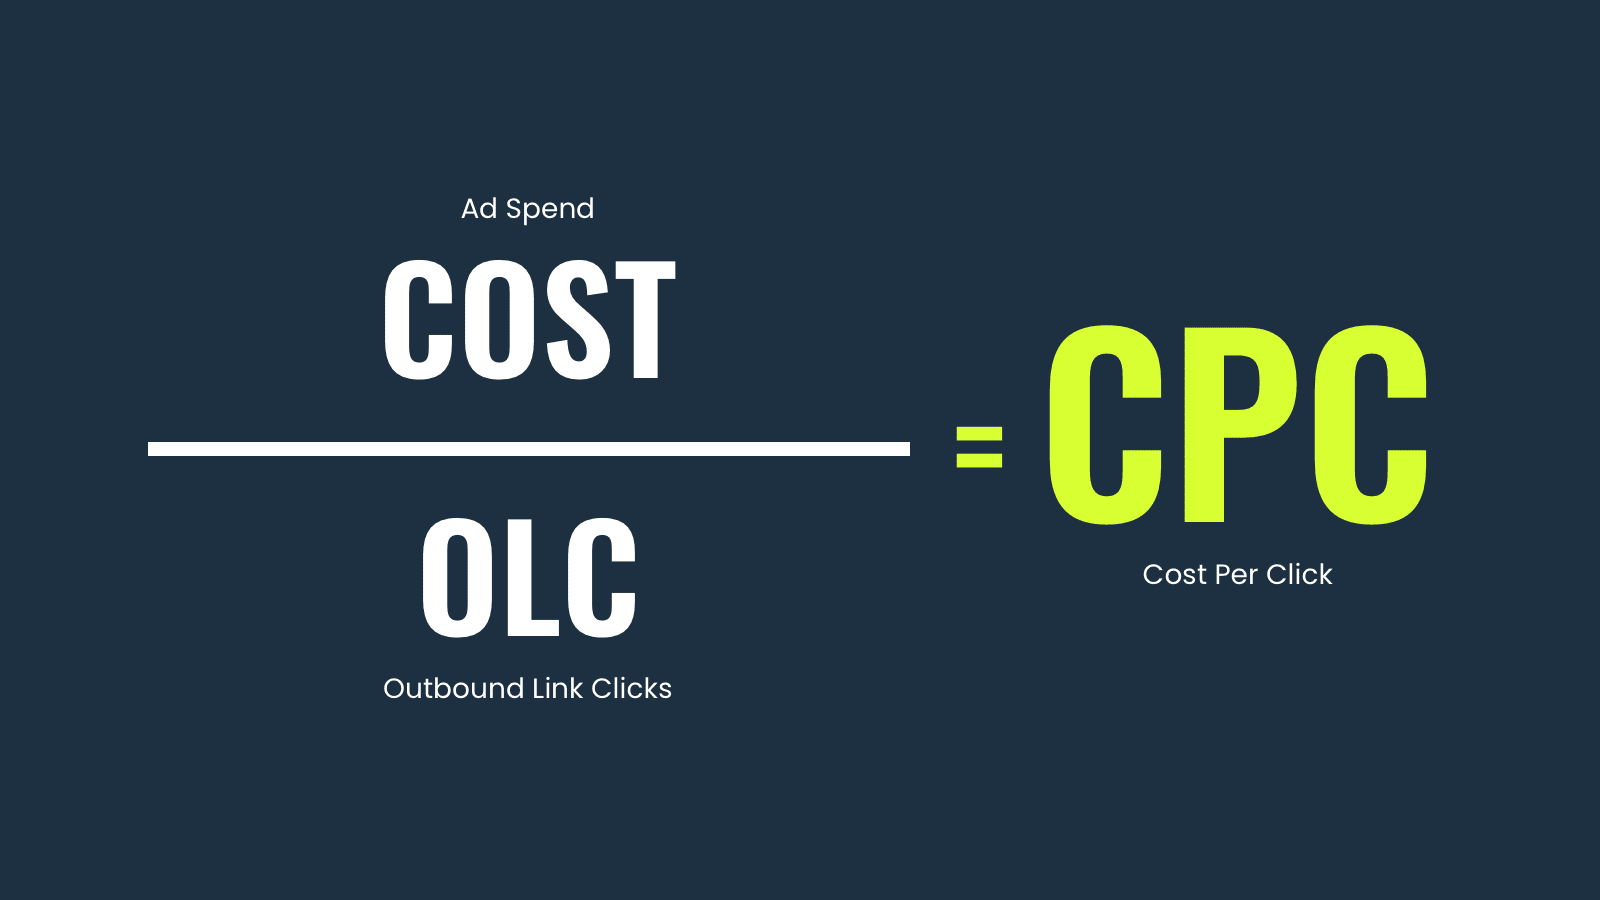 Cost Per Click (CPC) Explained: What It Is & Why It Matters